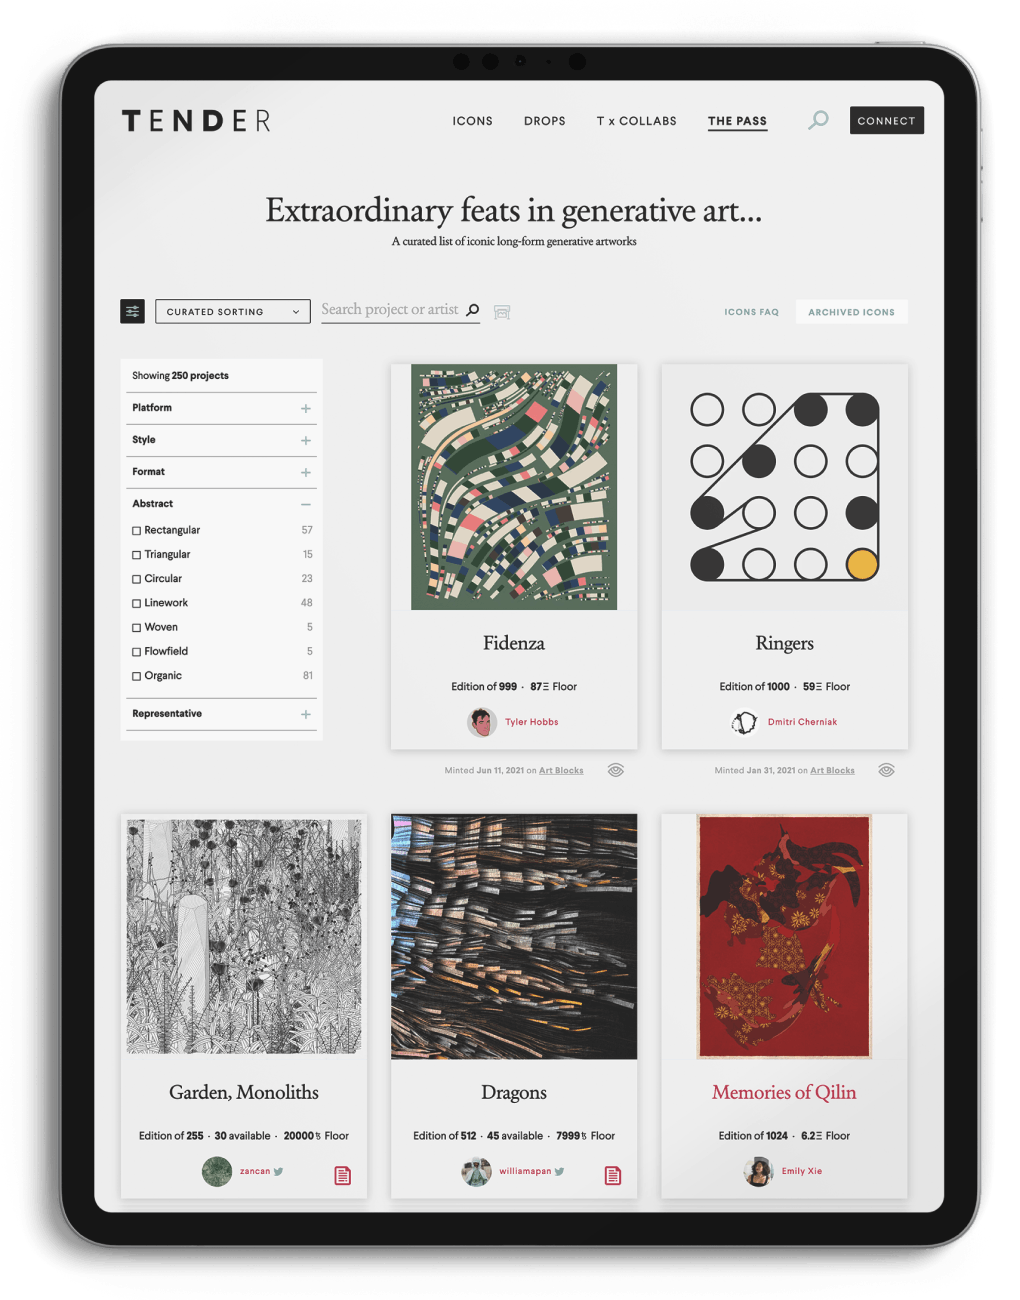 A curation of long-form Generative Icons.